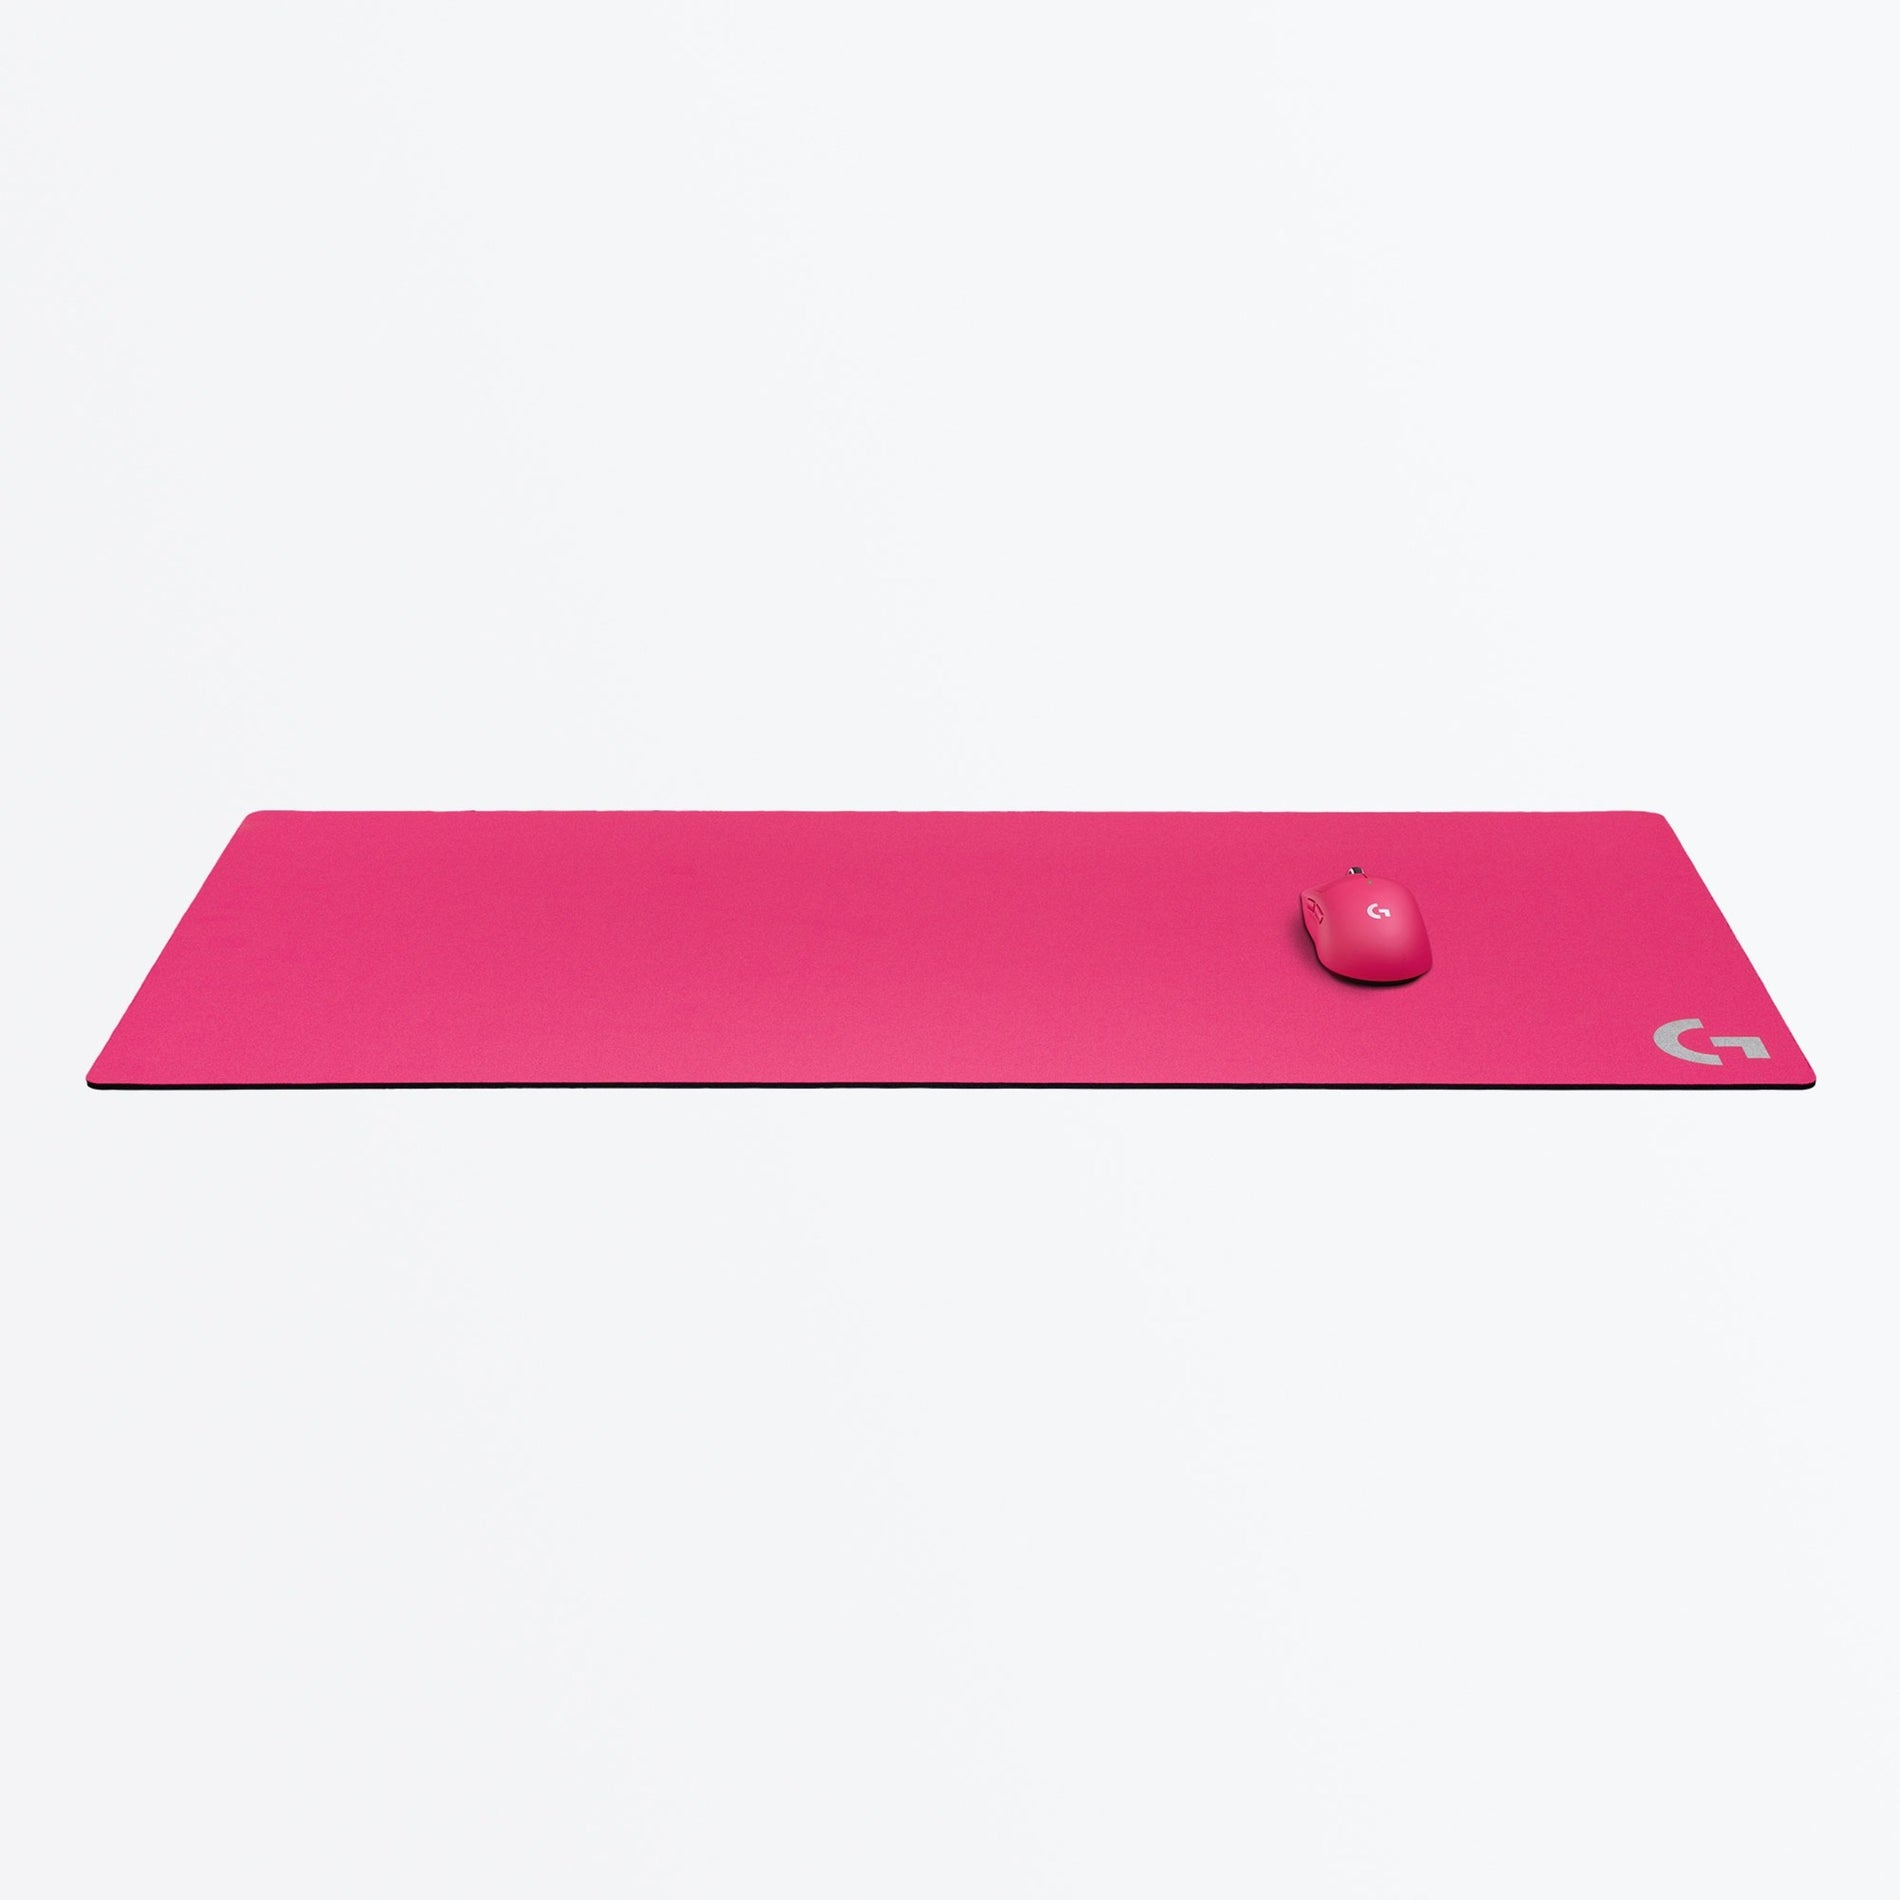 Logitech G 943-000712 G840 XL Gaming Mouse Pad, Extra Large Size, Surface Texture, Pink